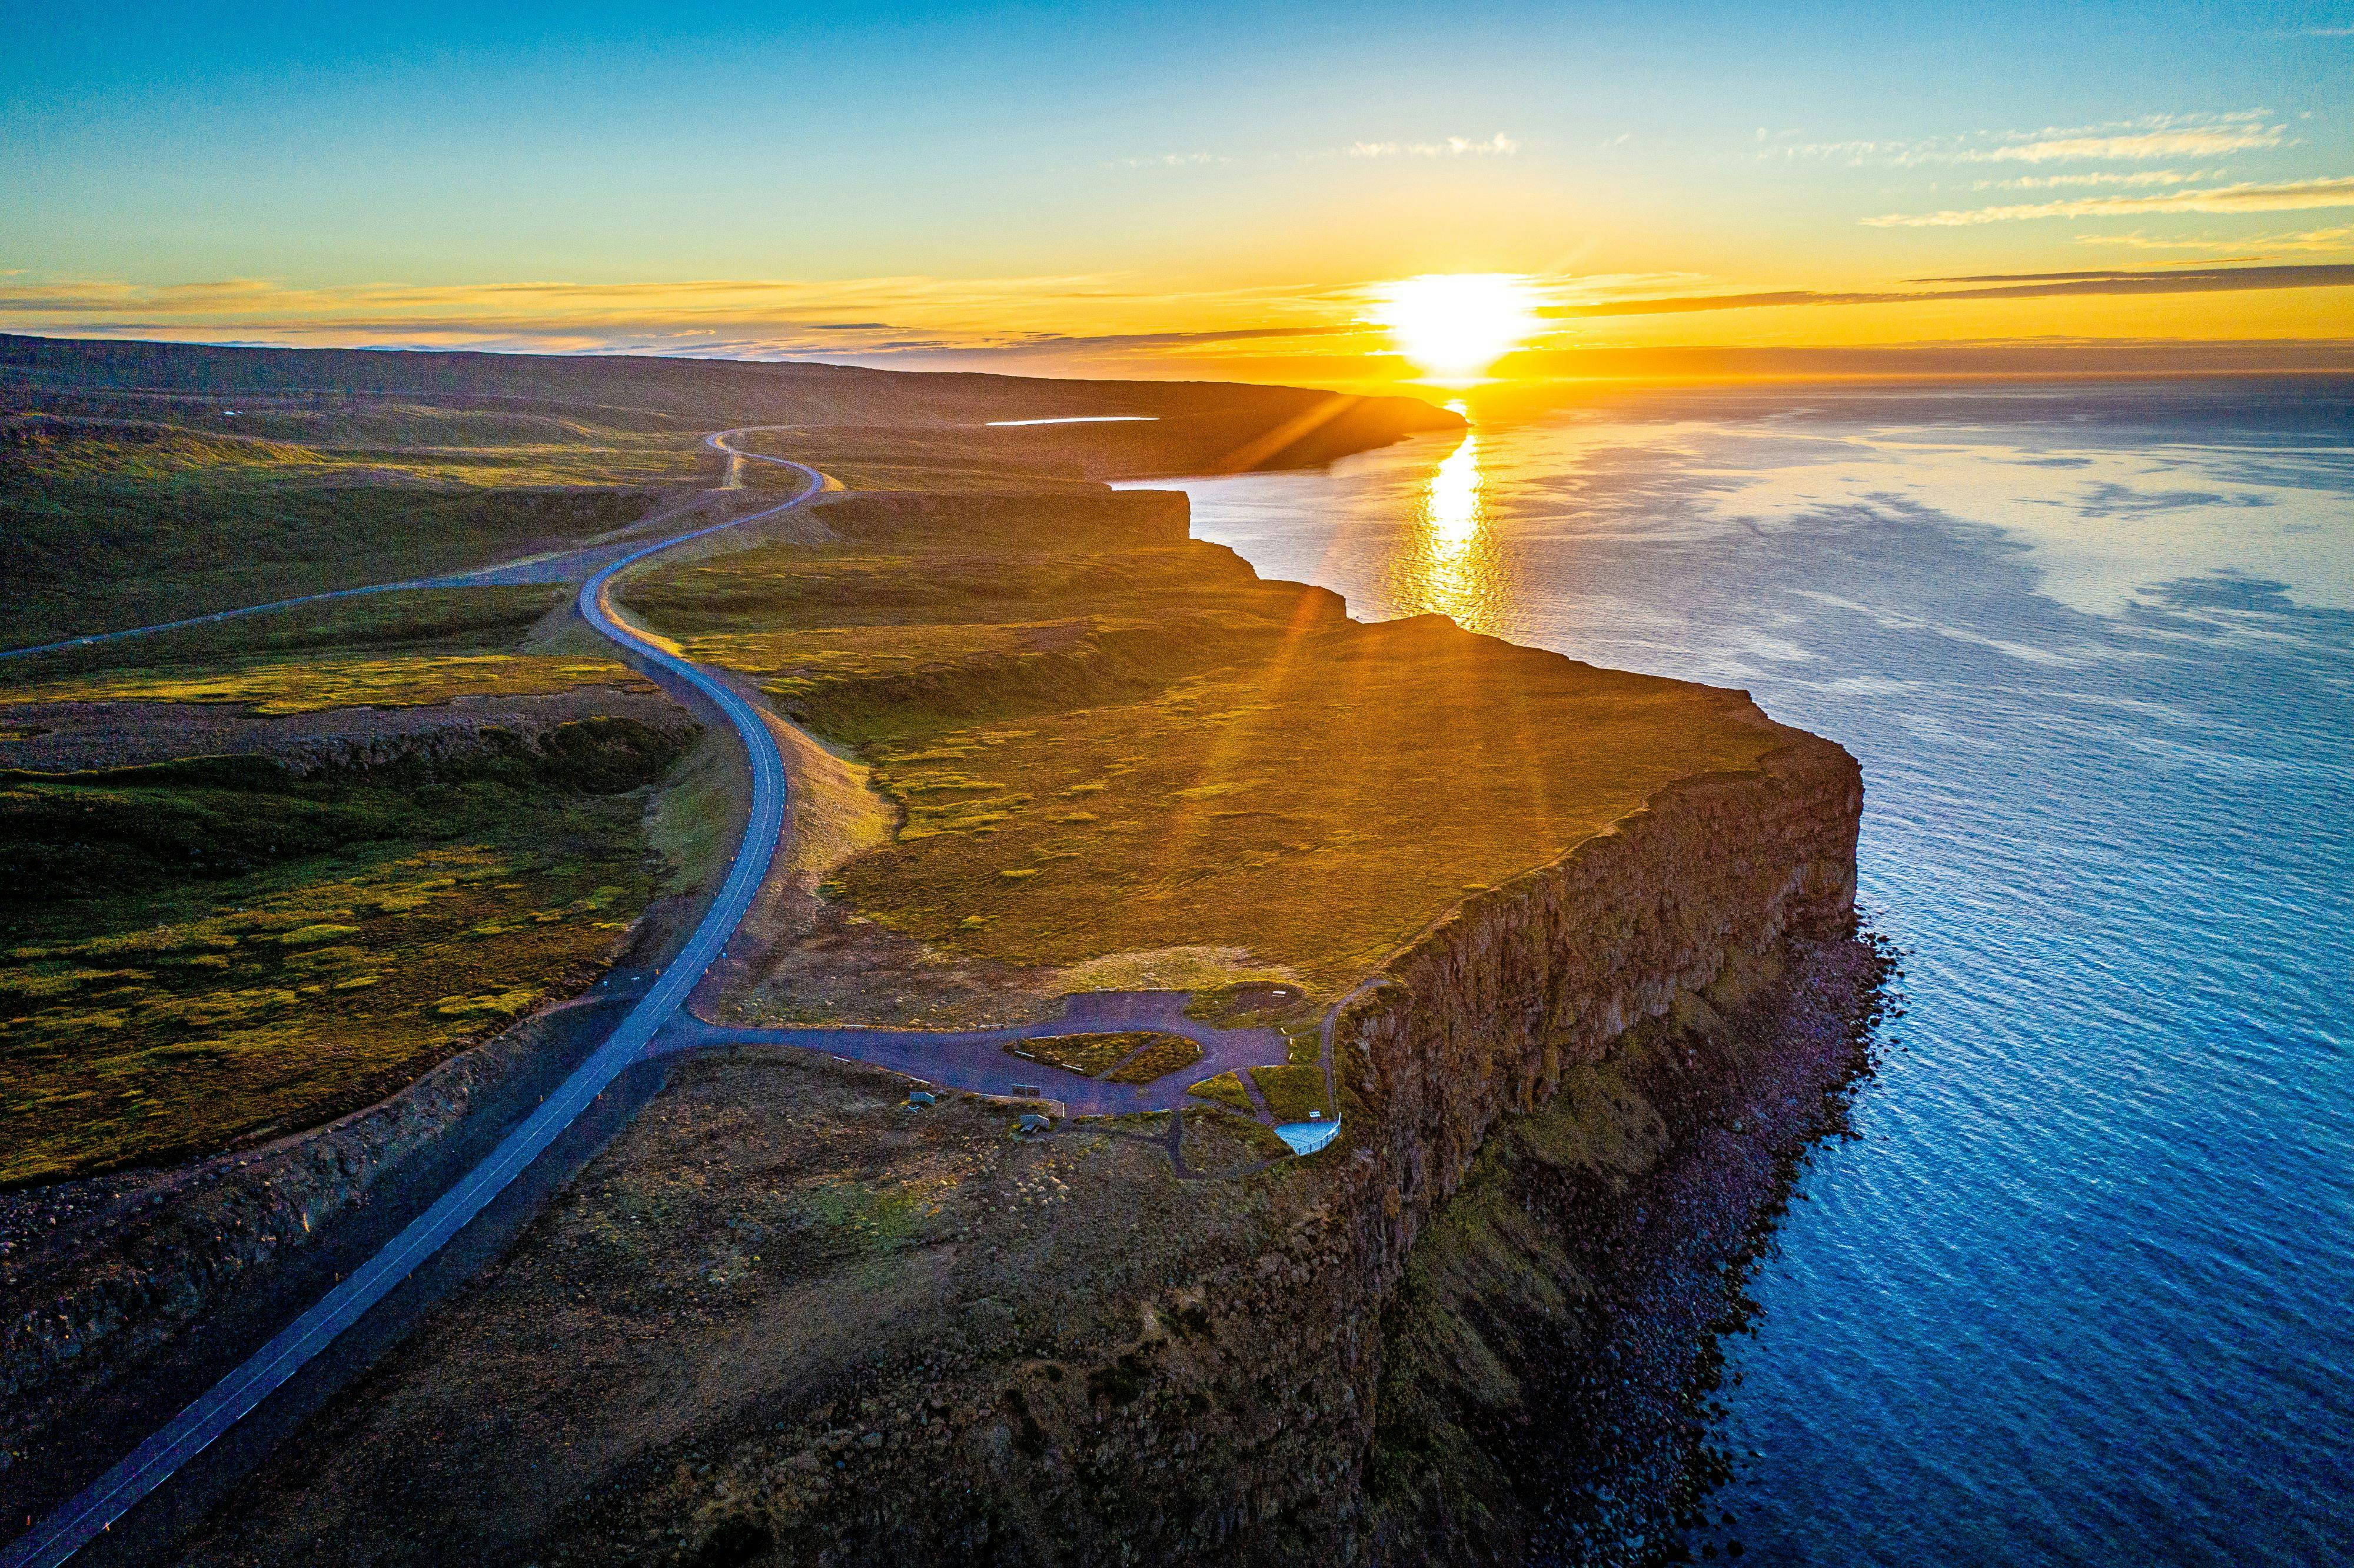 Midnight sun setting along the Arctic Coast Way, a road, cliffs and ocean in the picture